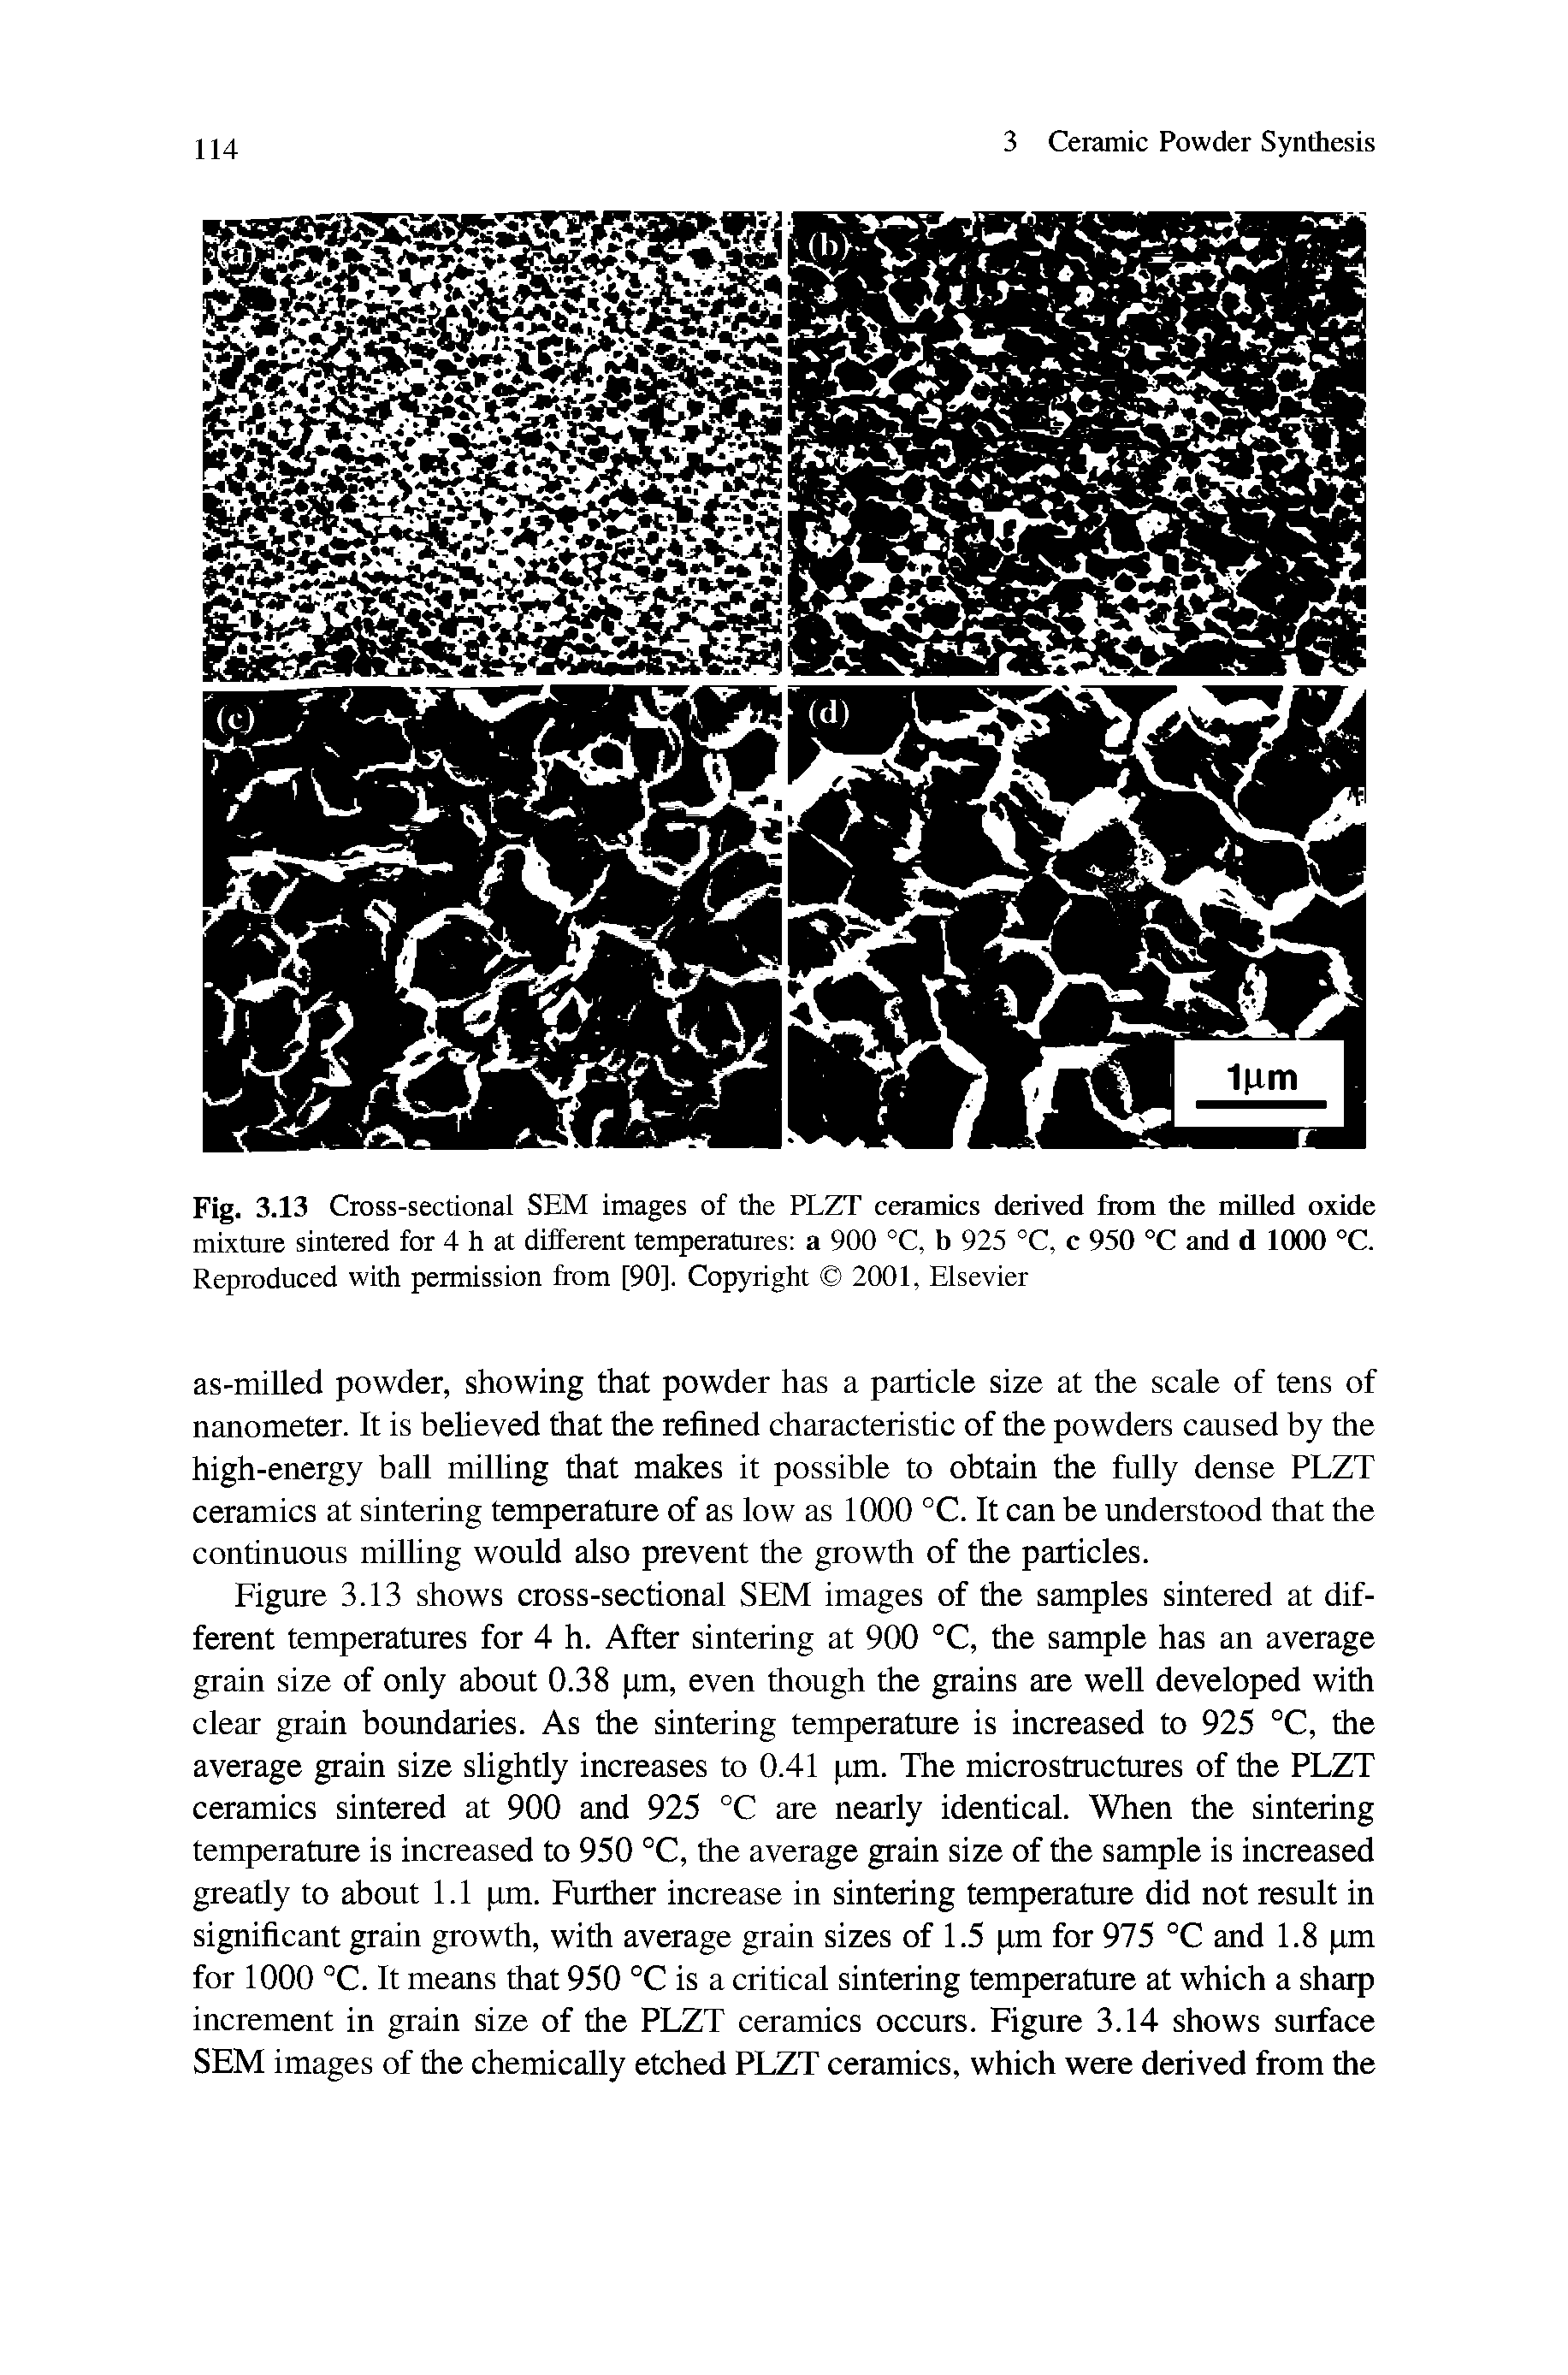 Fig. 3.13 Cross-sectional SEM images of the PLZT ceramics derived from the milled oxide mixture sintered for 4 h at different temperatures a 900 °C, b 925 °C, c 950 °C and d 1000 °C. Reproduced with permission from [90], Copyright 2001, Elsevier...